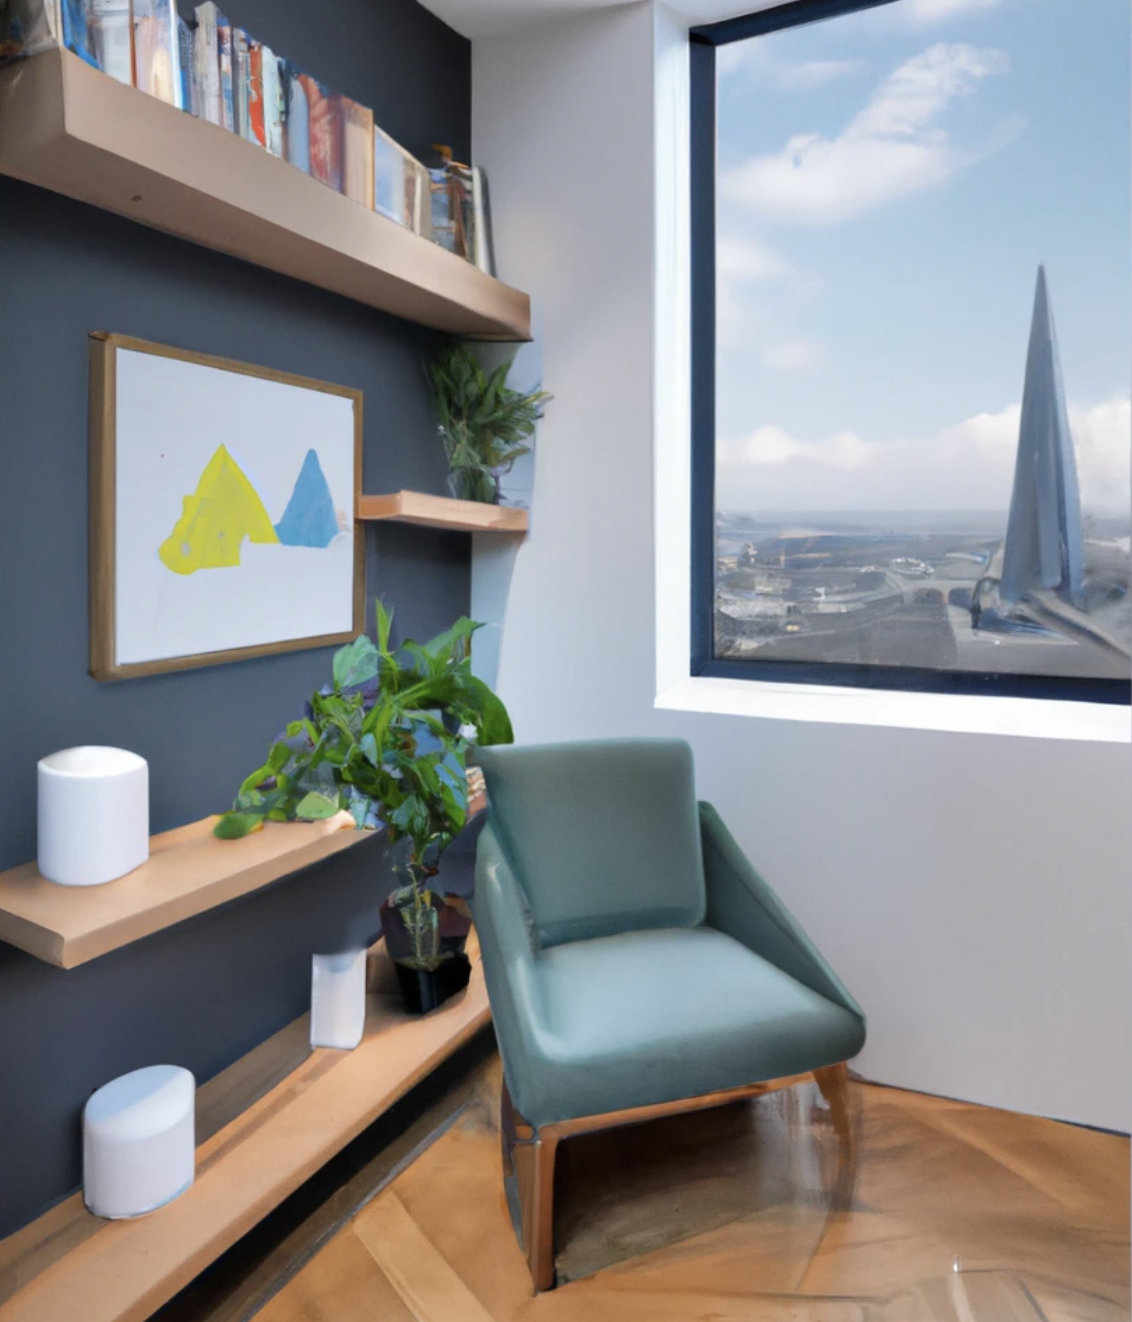 A serene therapy room with a view of London, designed for DBT programs and therapists near you, fostering a calm therapeutic environment.